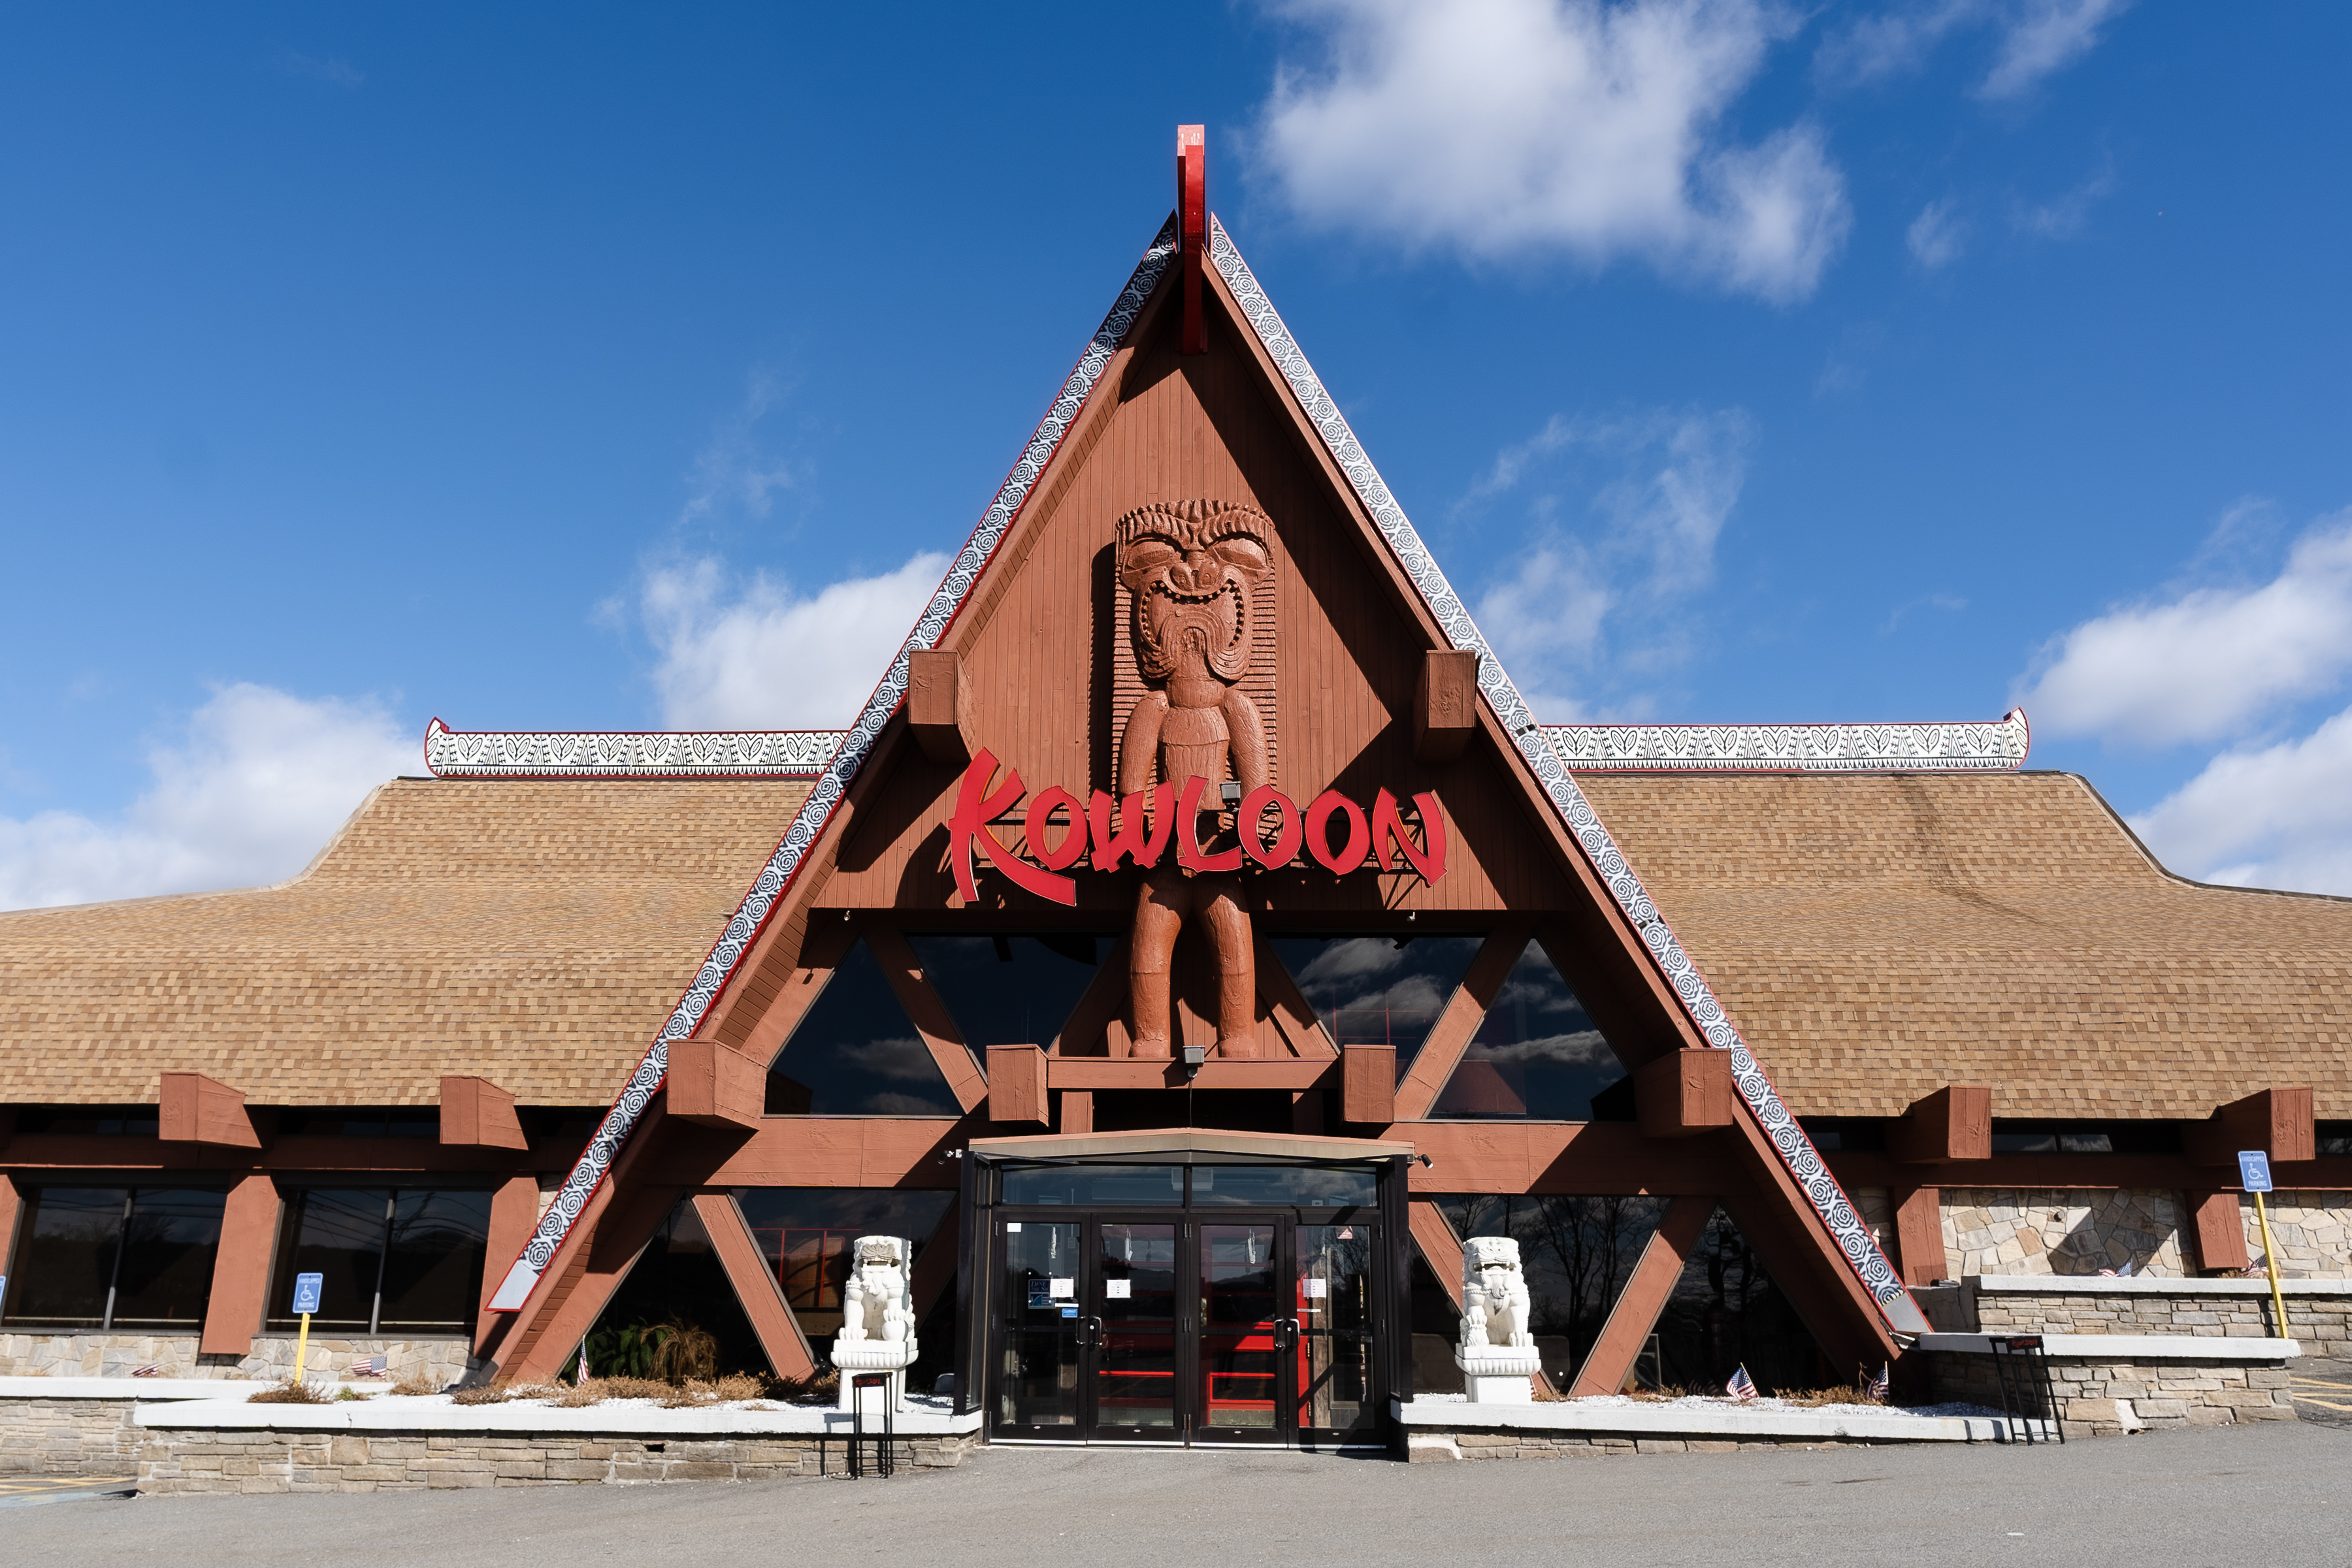 The exterior of Kowloon restaurant has a large triangle-shaped main entrance with a wooden totem on the facade.